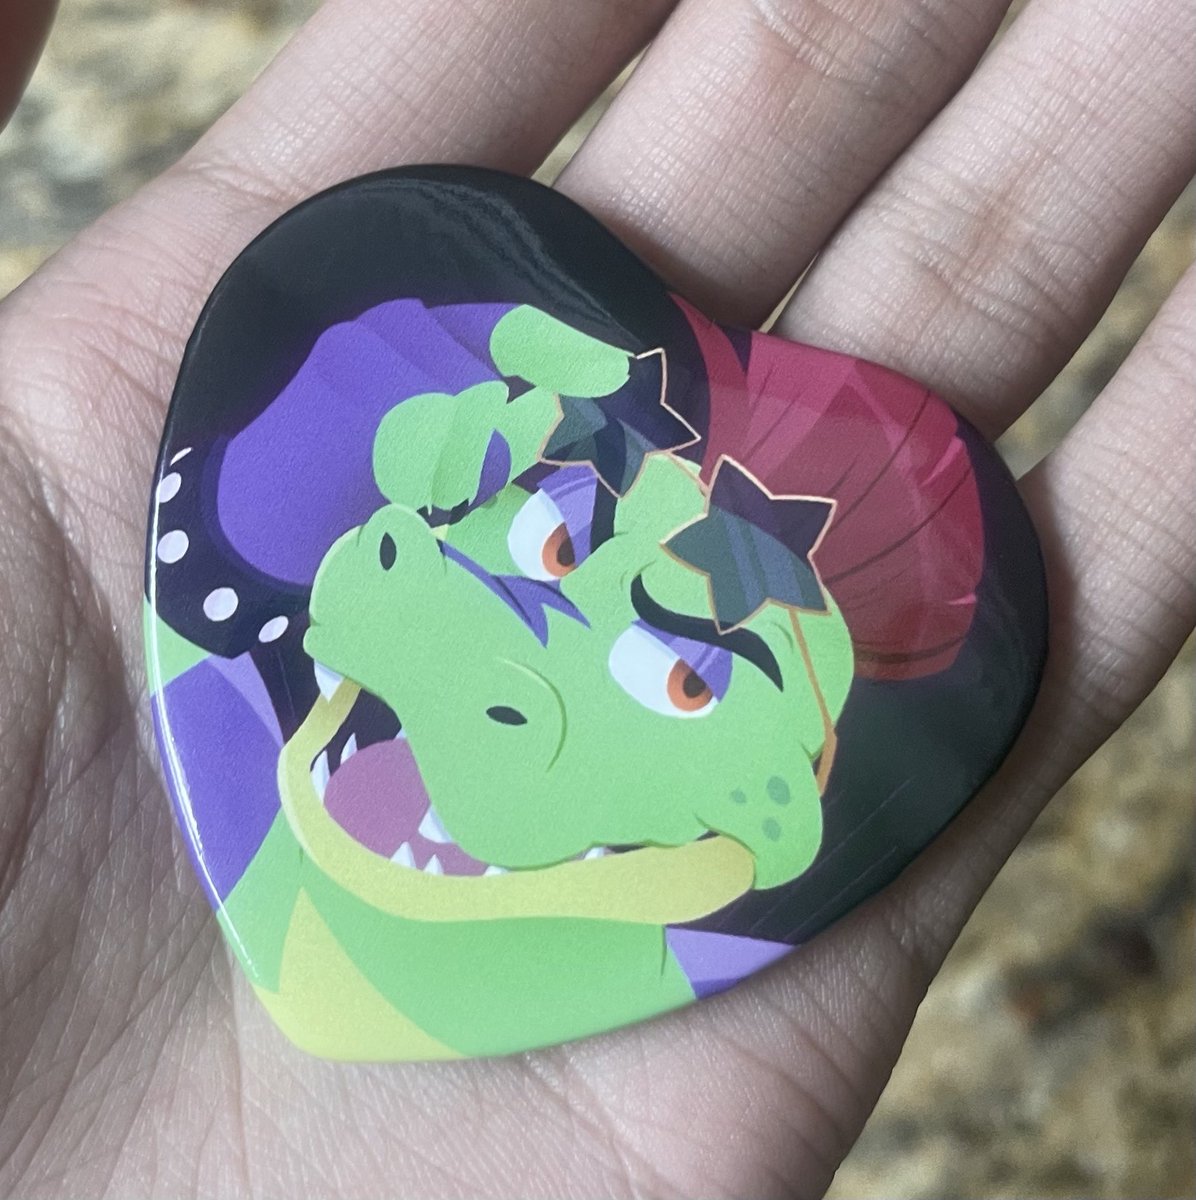 A new piece to the Monty collection 
✨🐊

#monty #montygator #montgomerygator #collection #pin #fnaf